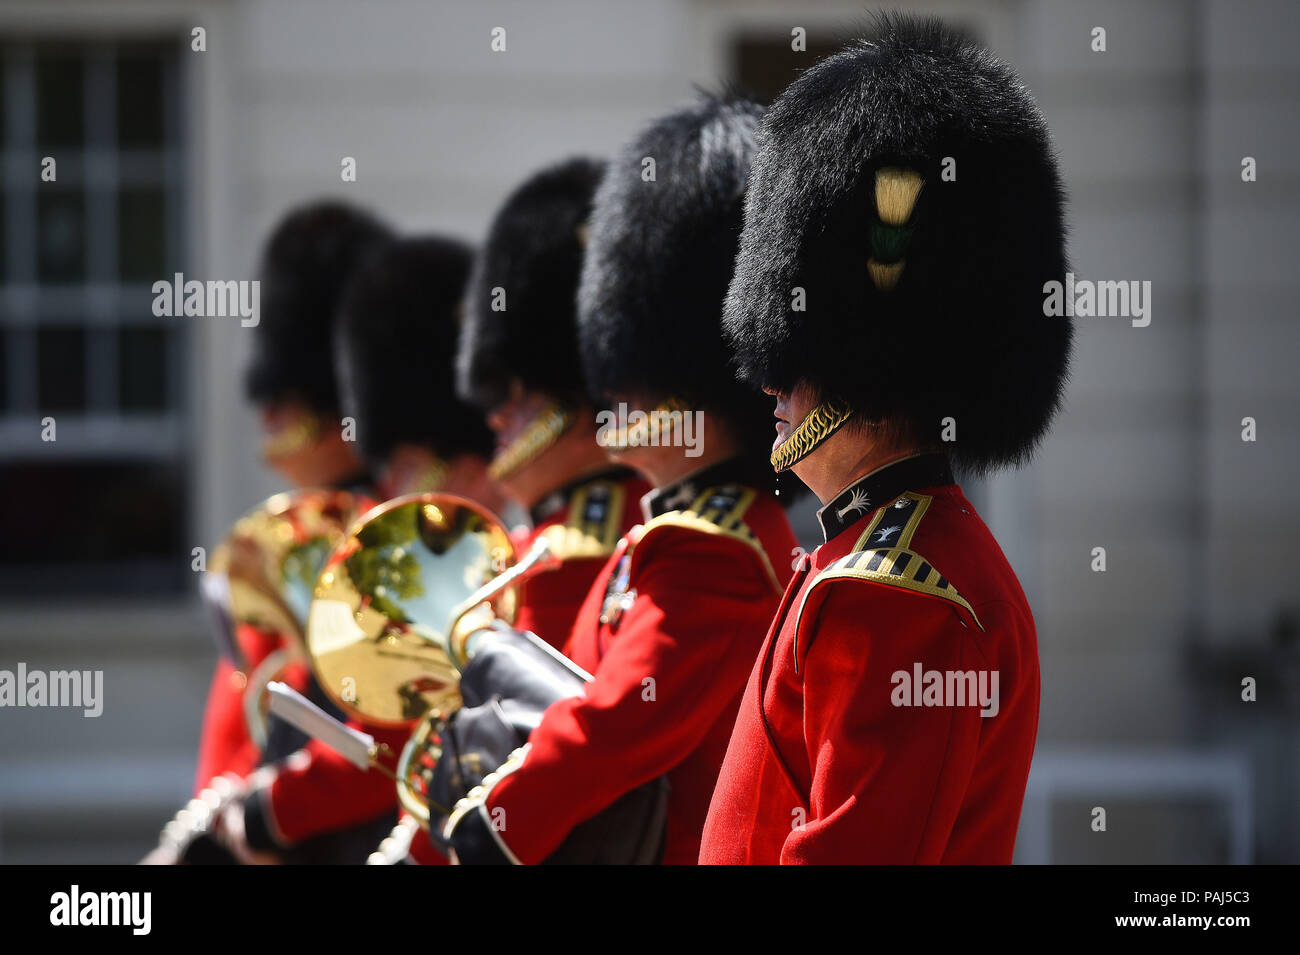 A bead of sweat falls from a member of The Queen's Guard as he takes part in the Changing the Guard ceremony at Wellington Barracks in London, as the hot weather continues across the country. Stock Photo